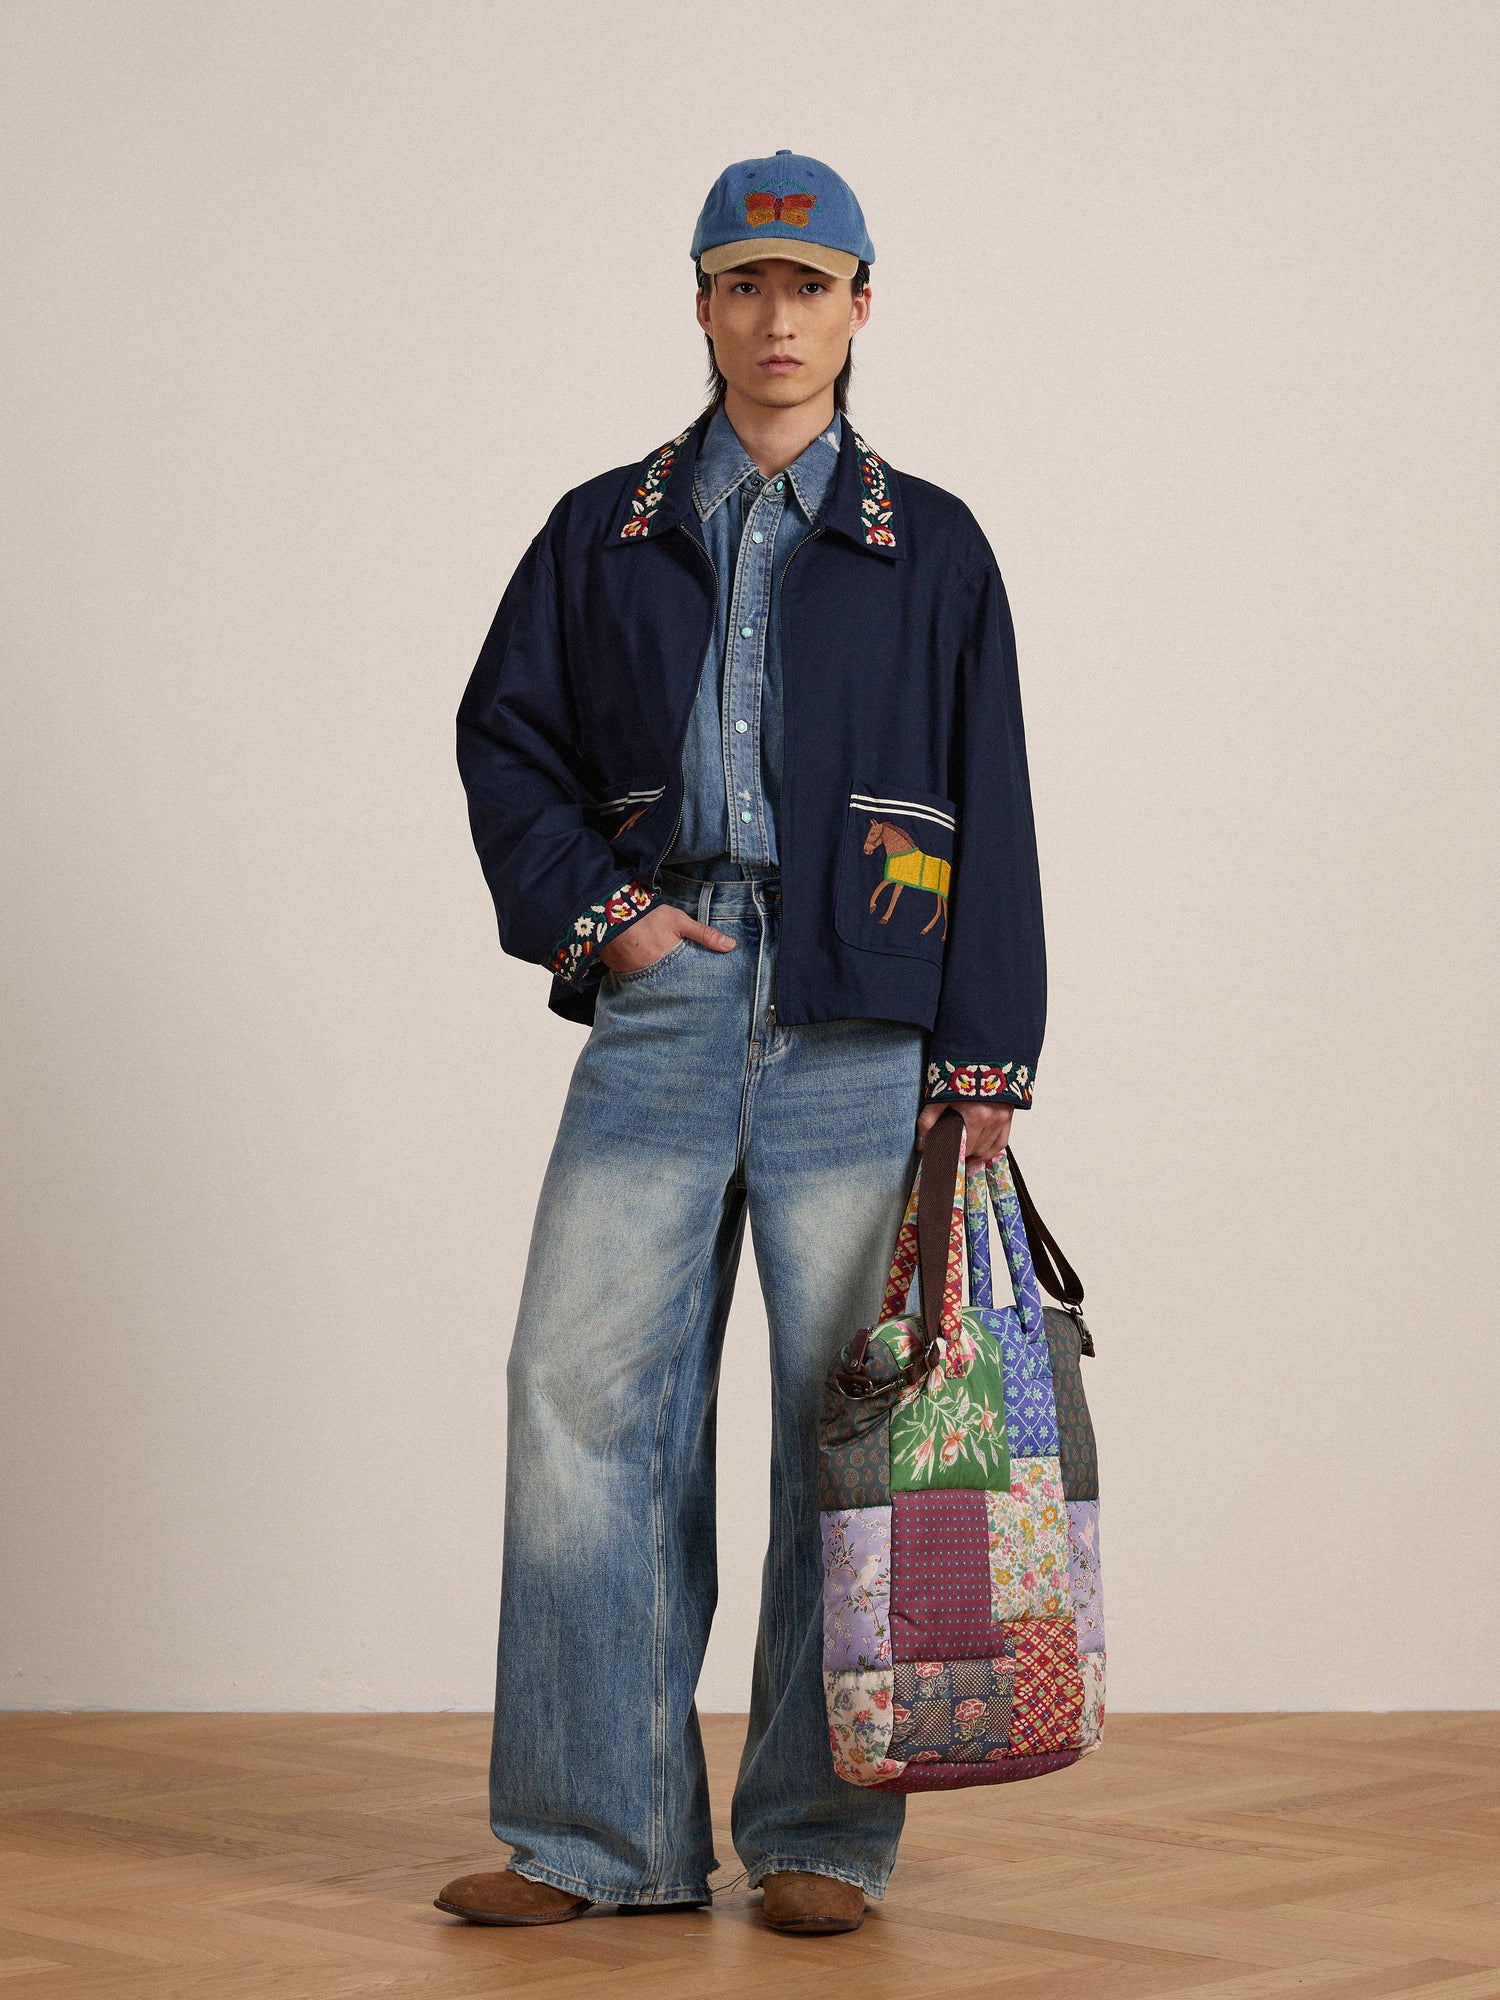 Man in eclectic outfit featuring a Found Horse Equine Work Jacket with detailed embroidery, wide-leg jeans, a baseball cap, and a colorful patchwork tote bag, standing against a plain backdrop.